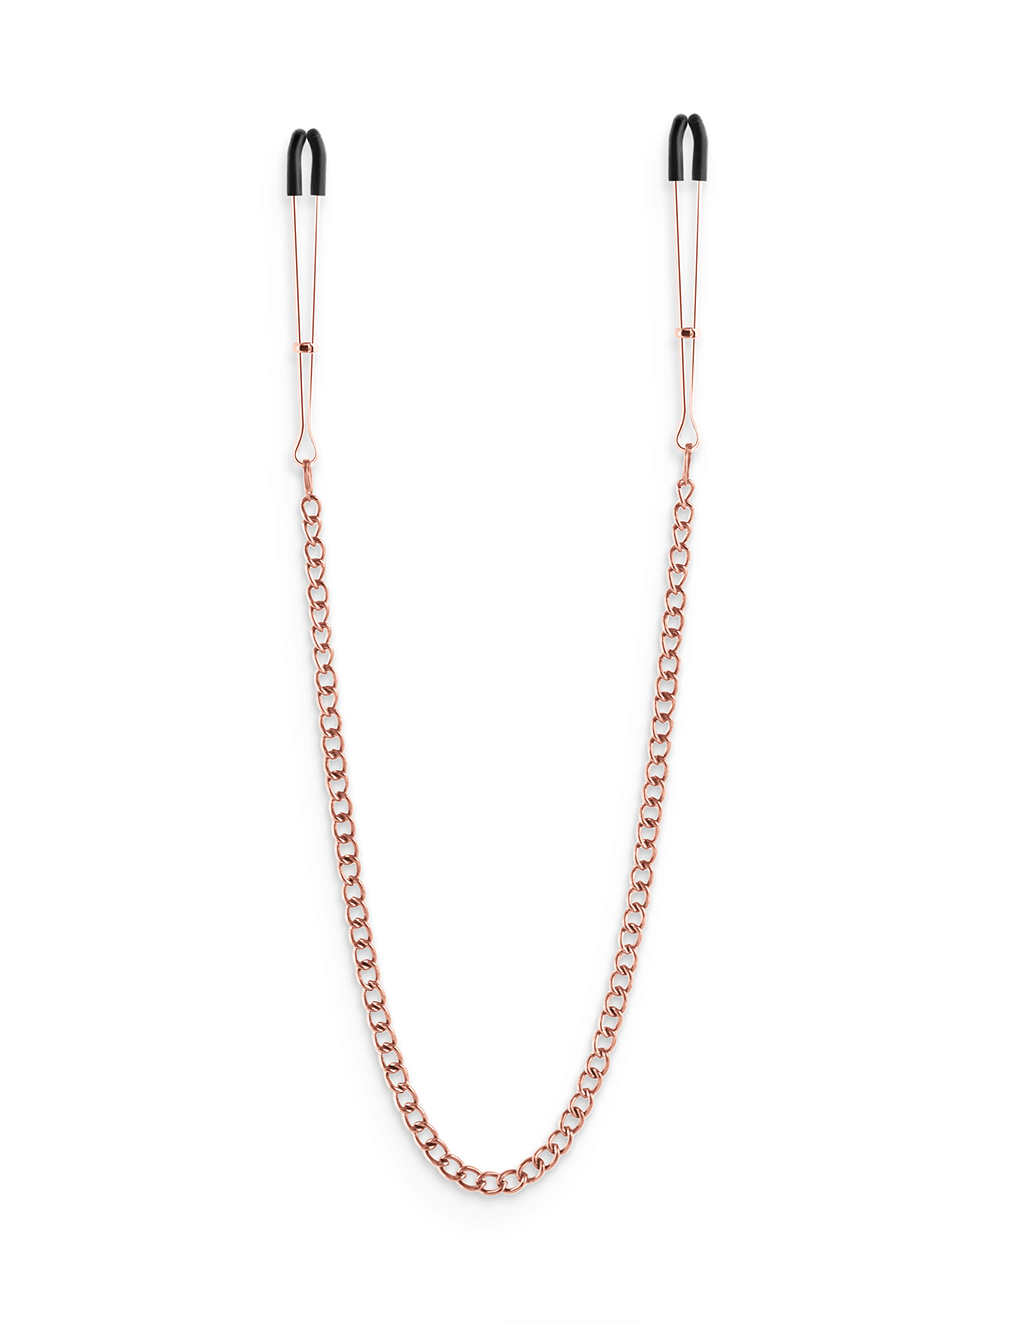 Tweezer Small Chain Clamps DC3 - Rose Gold